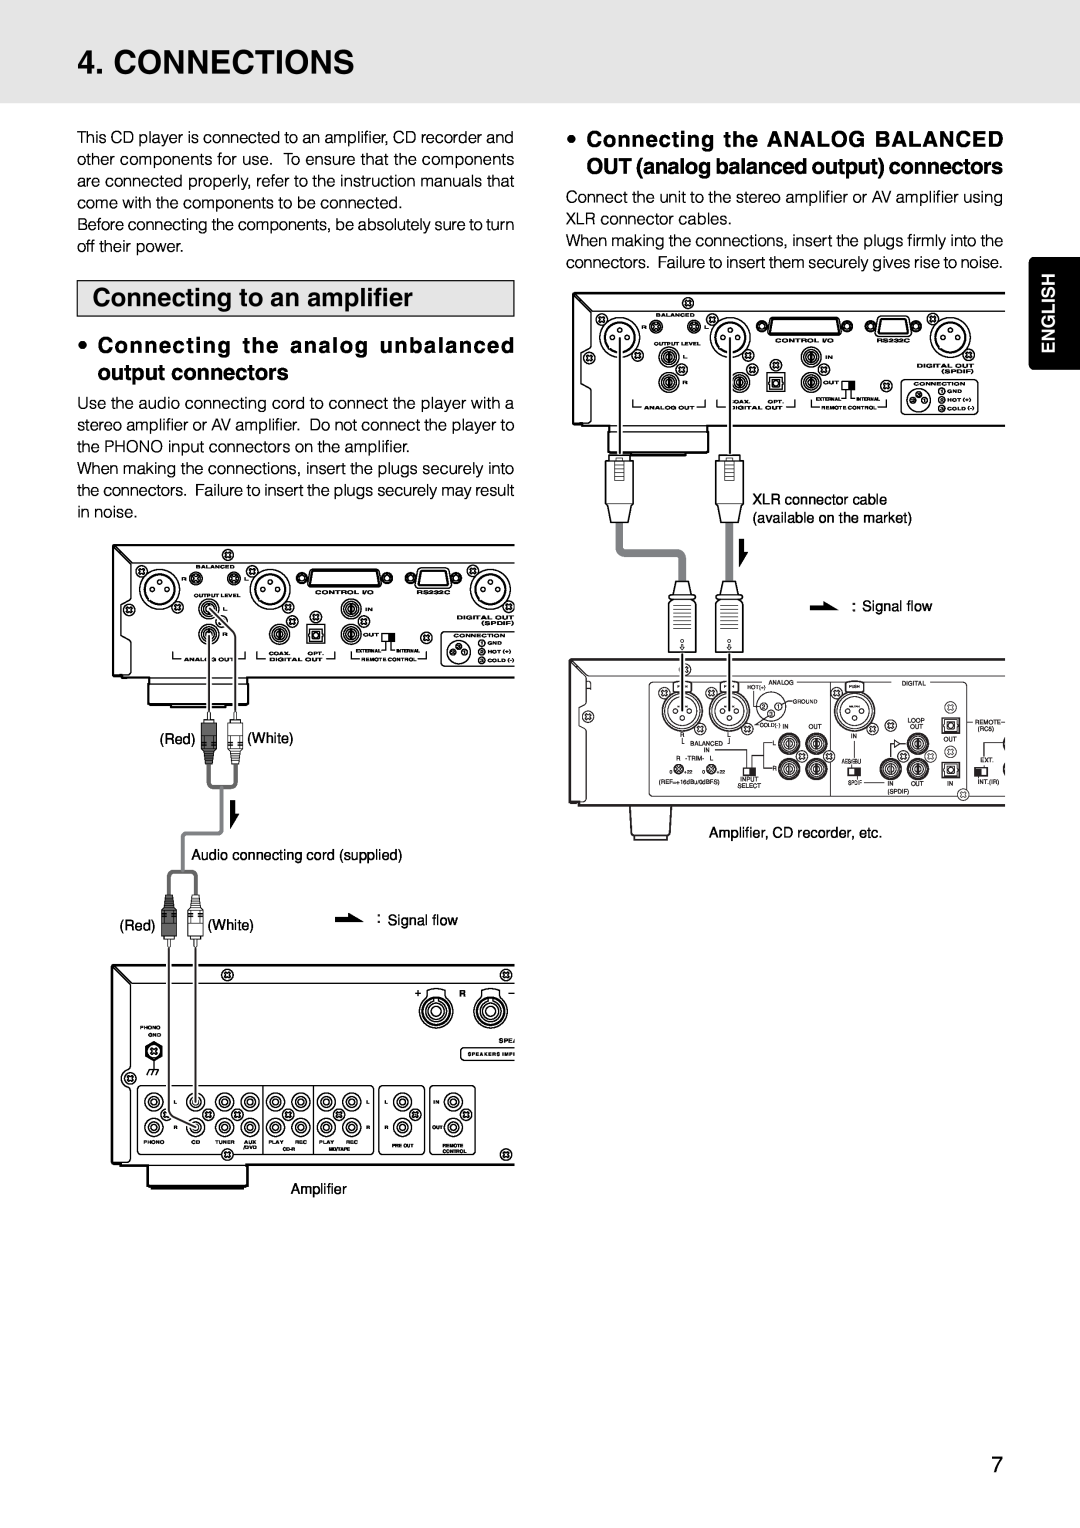 Marantz PMD325 manual Connections, Connecting to an amplifier 